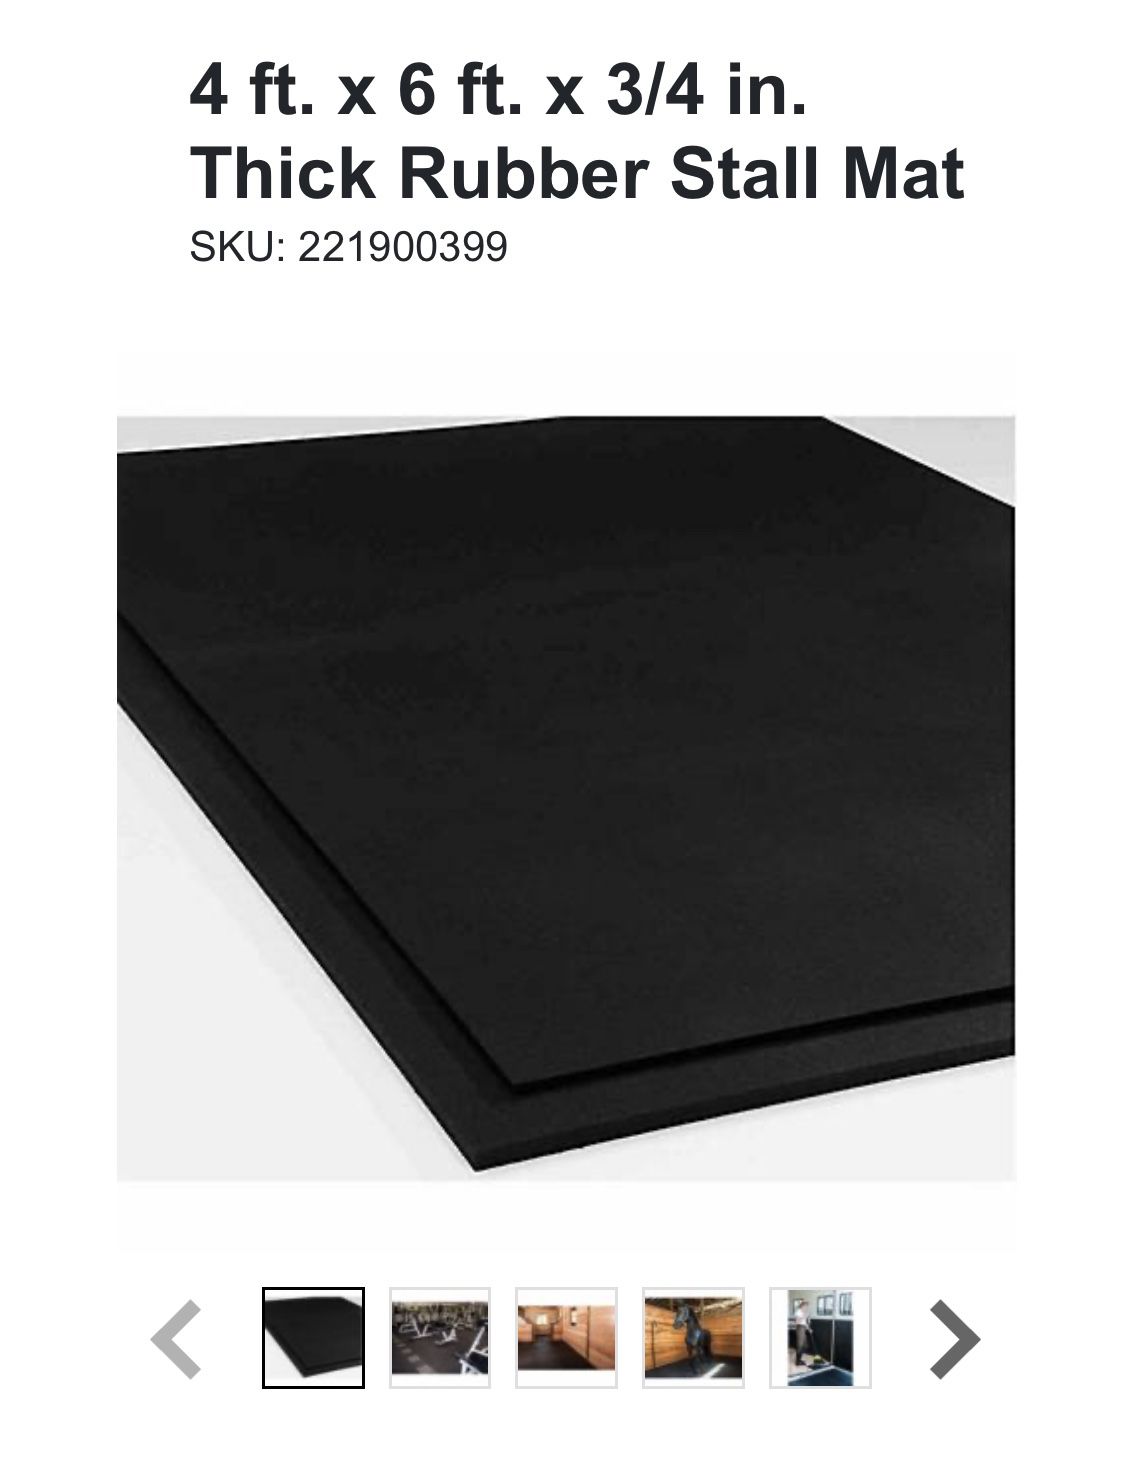 Thick Rubber Stall Mat 4 ft x 6 ft x 3/4 in